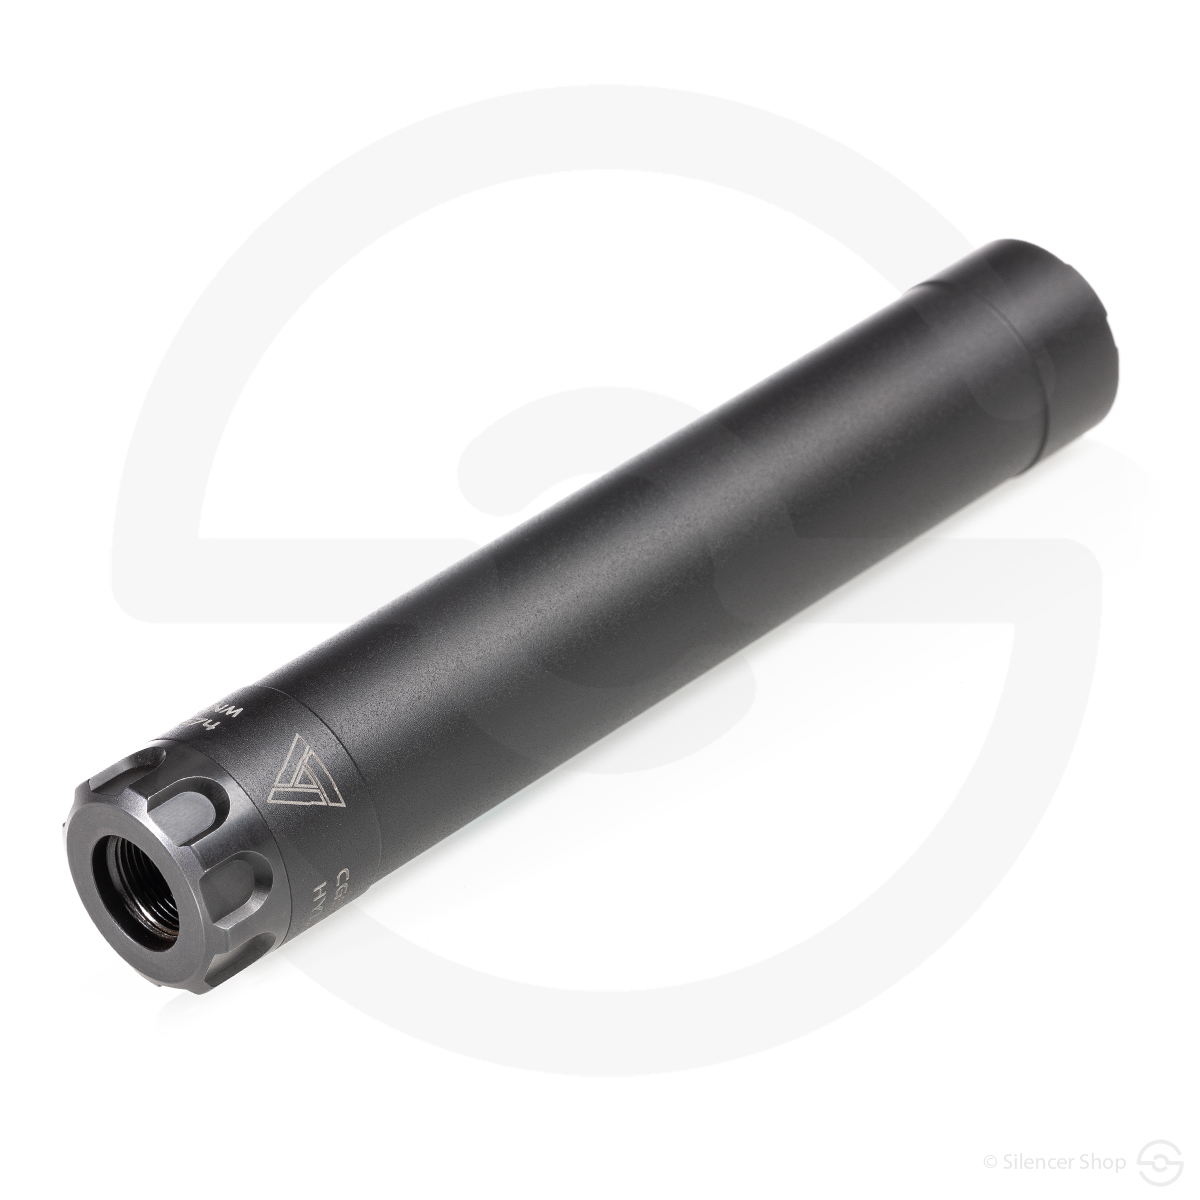 1/2x28 THREAD SILENCER MUFFLER NOISE REDUCTOR ONLY FOR AIR RIFLE 